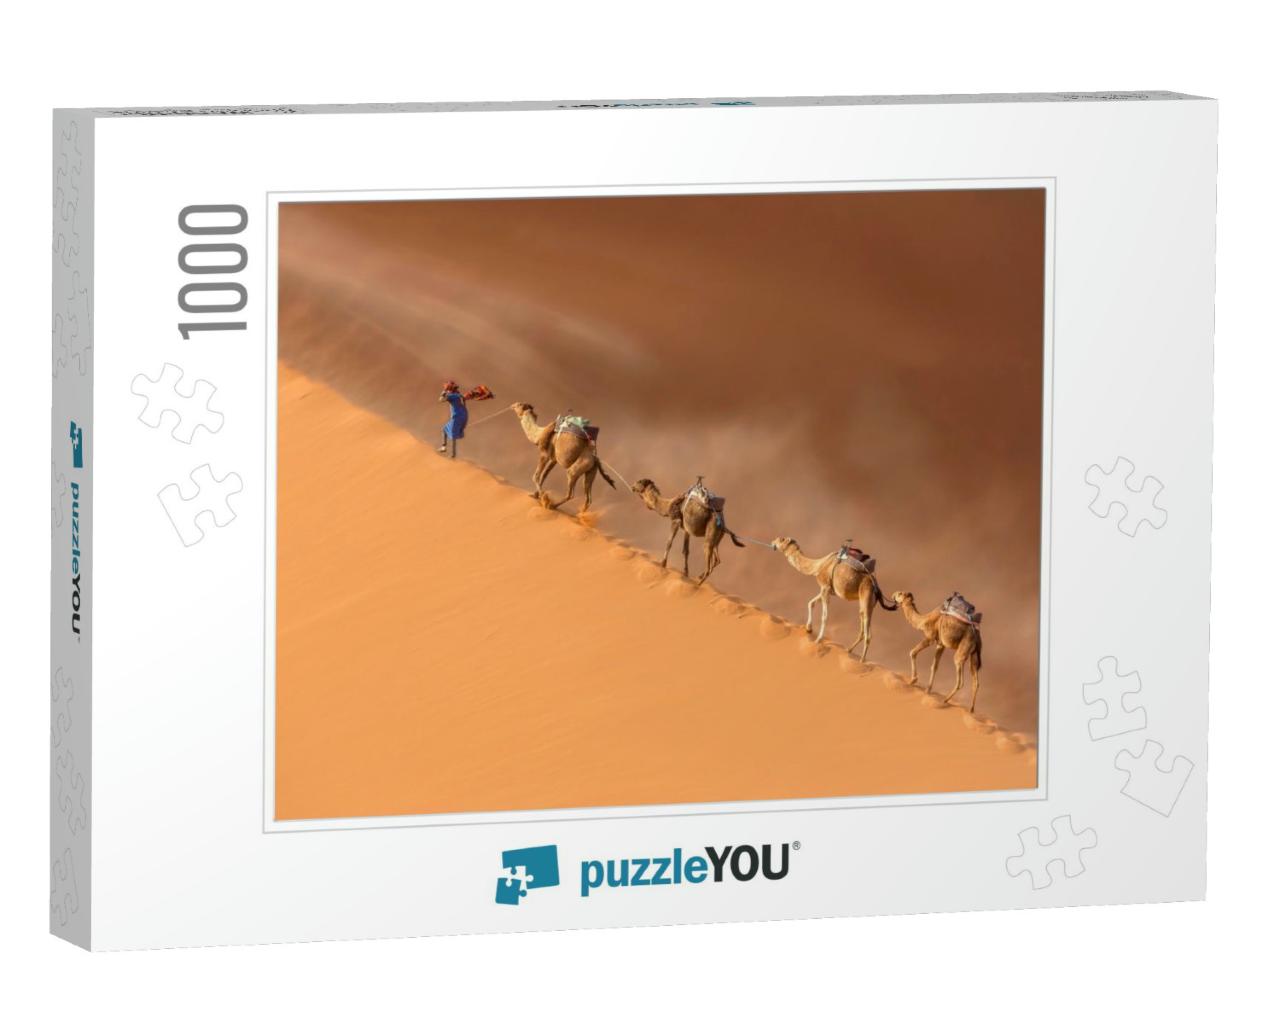 Drover Leads a Camel Caravan in the Sahara Desert During... Jigsaw Puzzle with 1000 pieces